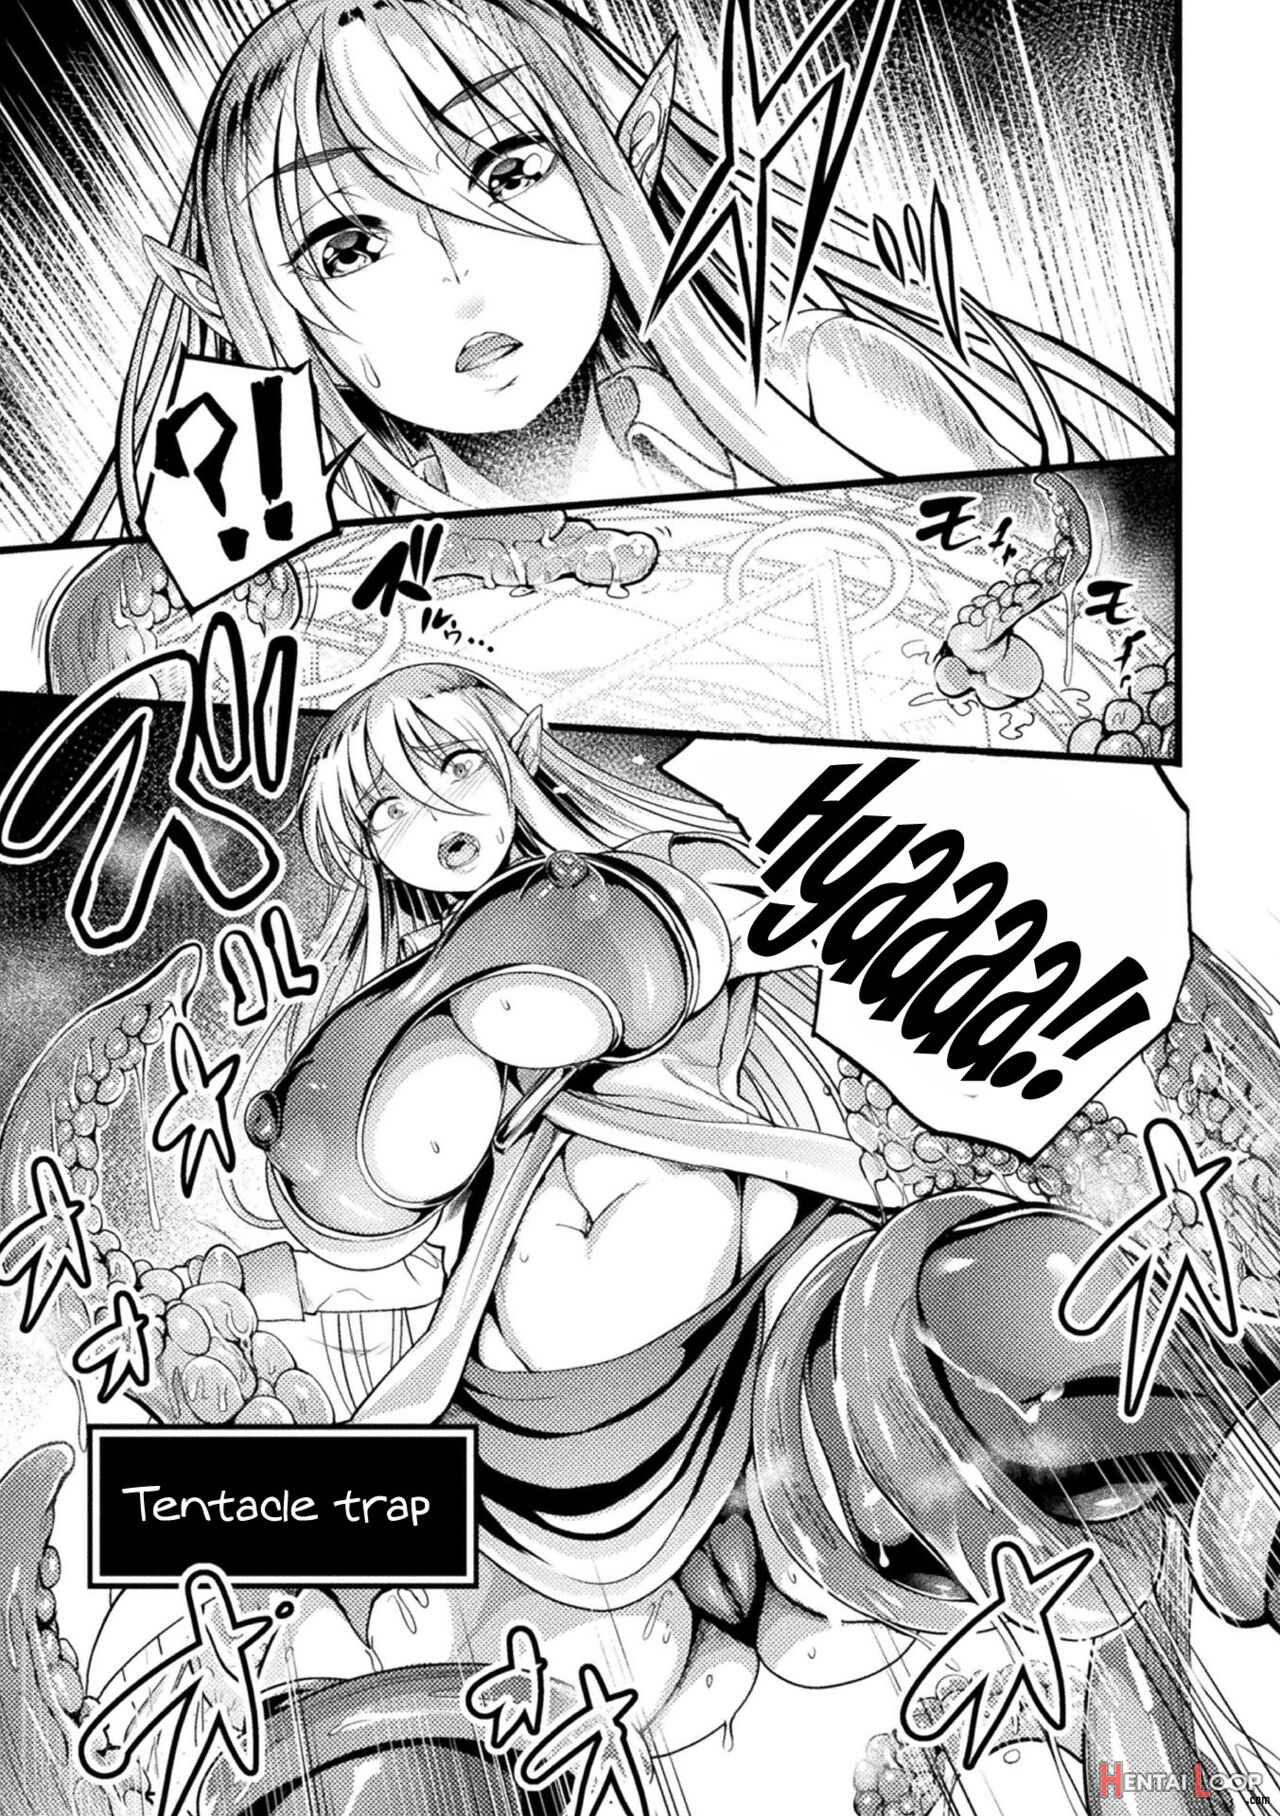 Lewd Trap Dungeon! The Elf Hunting Tentacle Hole Ep.1-3 page 5